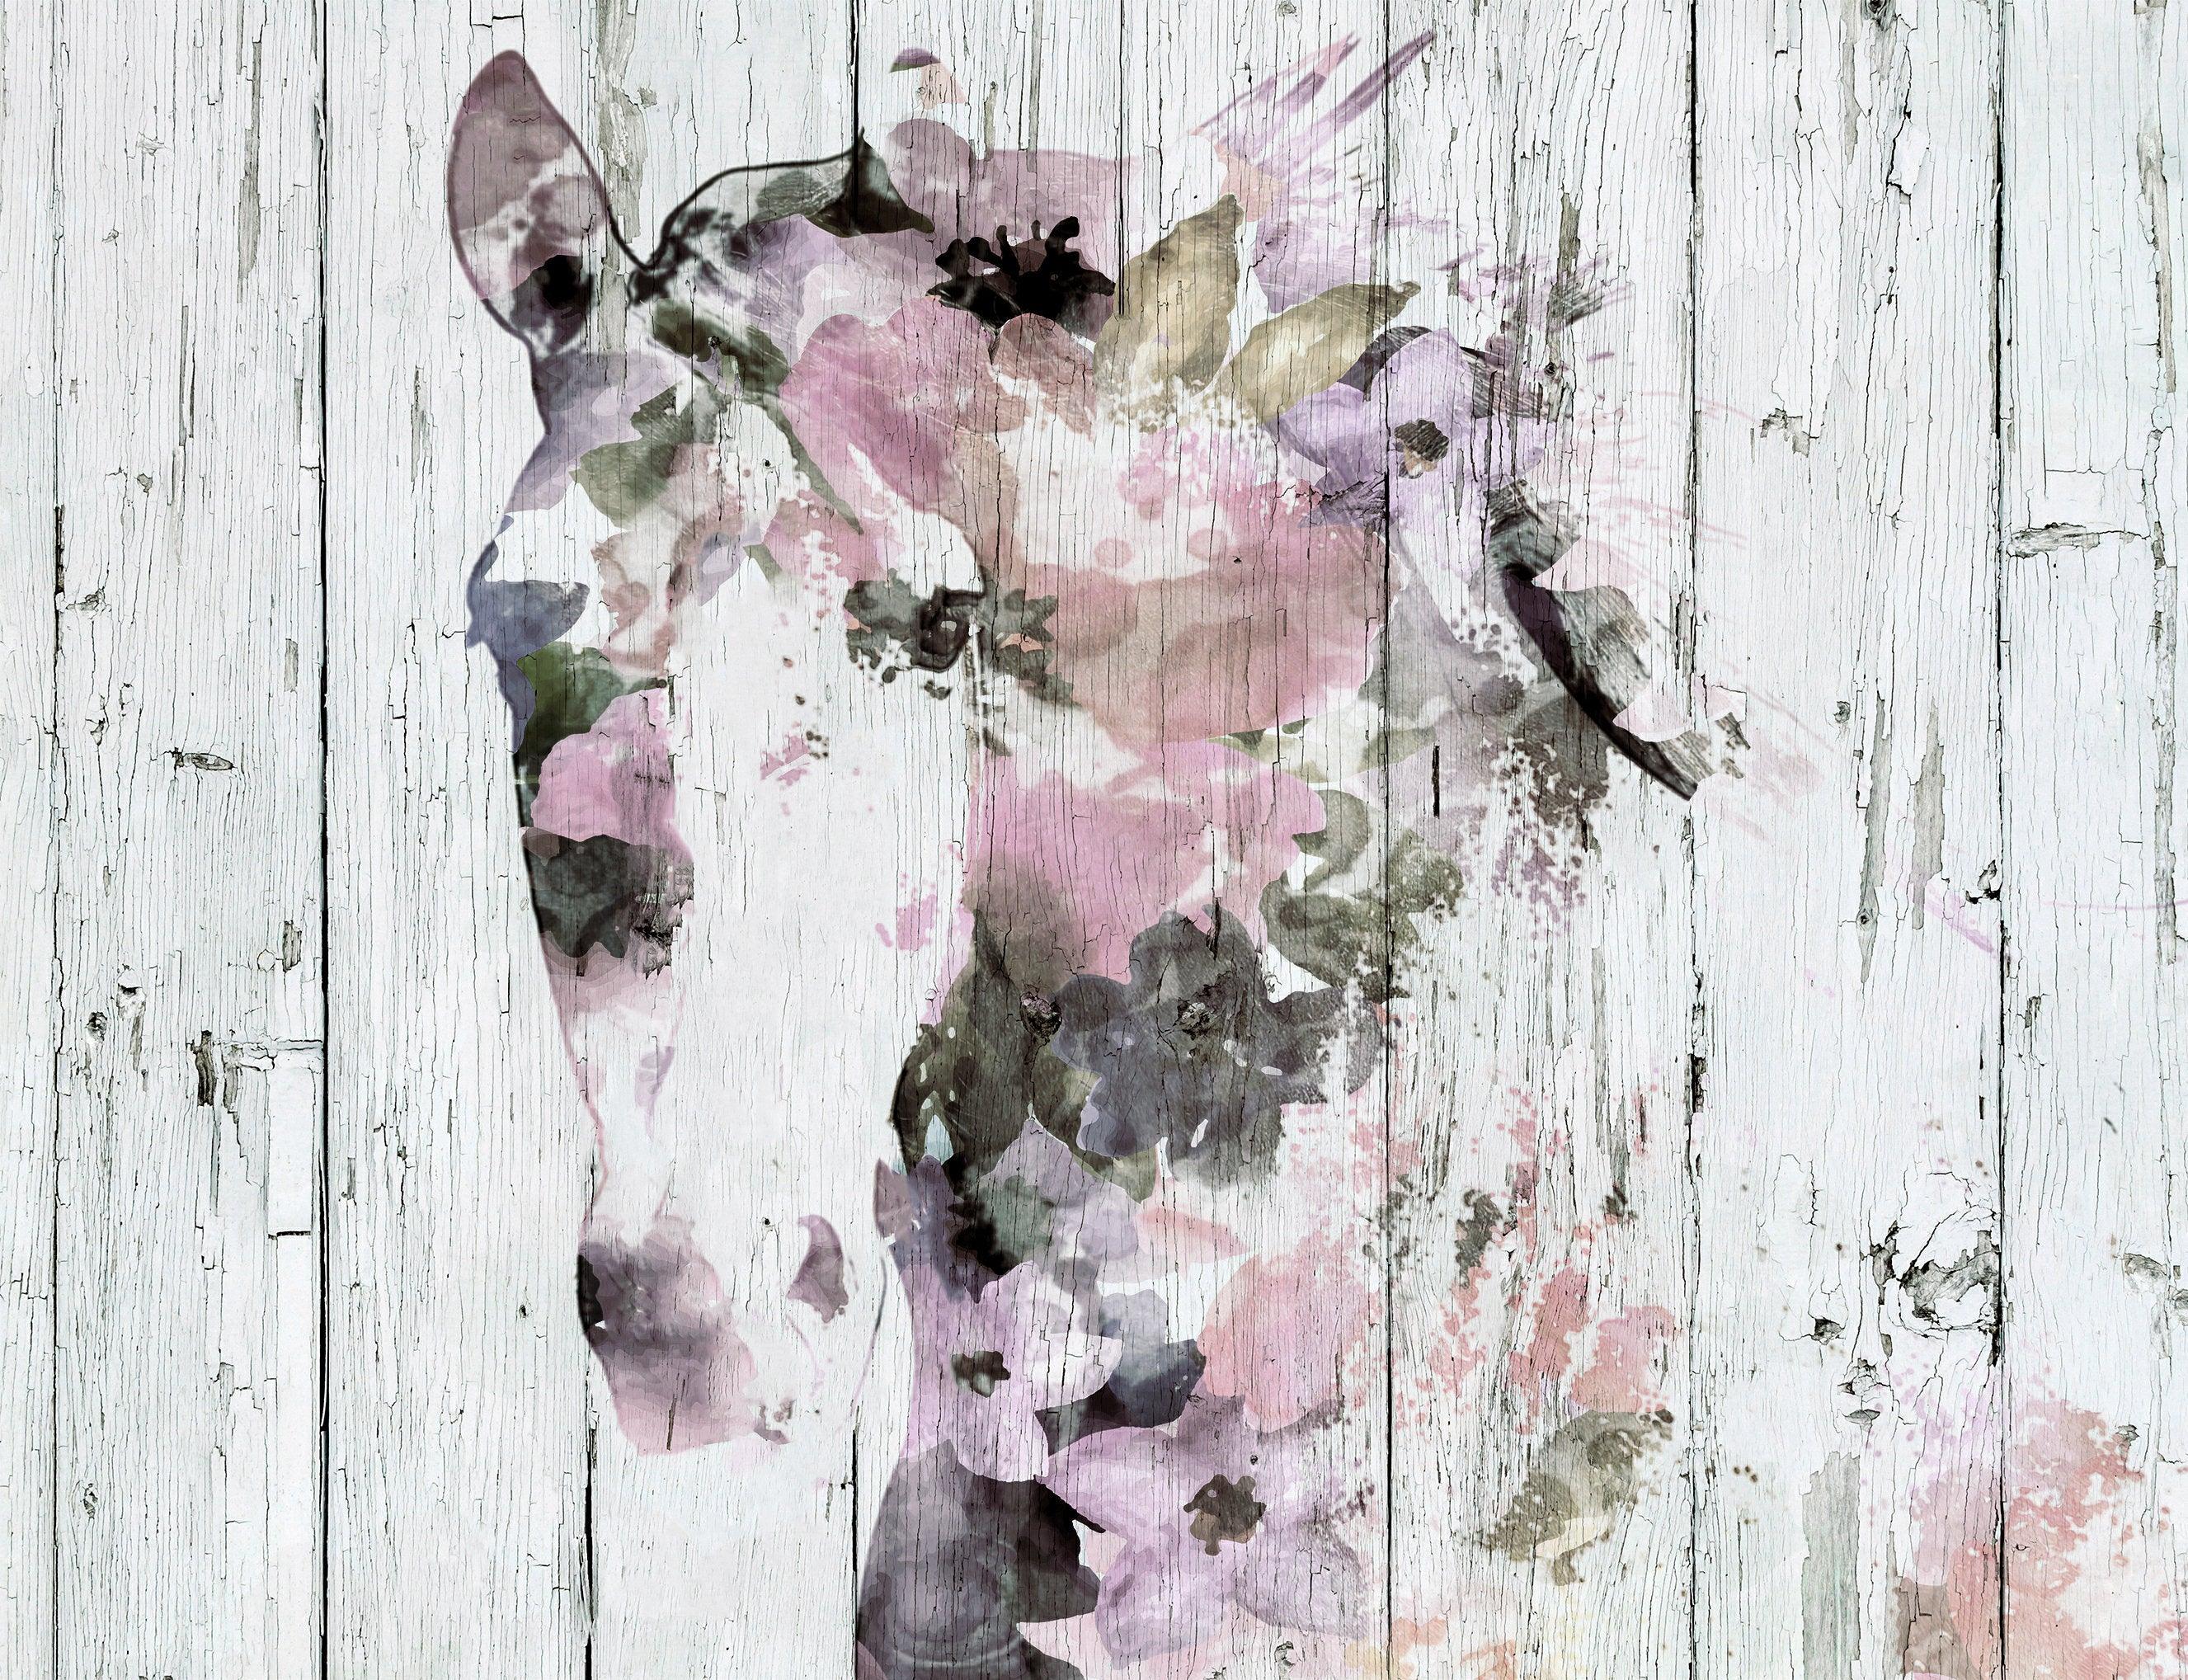 Horse Farmhouse Pink Purple White Mixed Media Painting on Canvas 48 x 36"